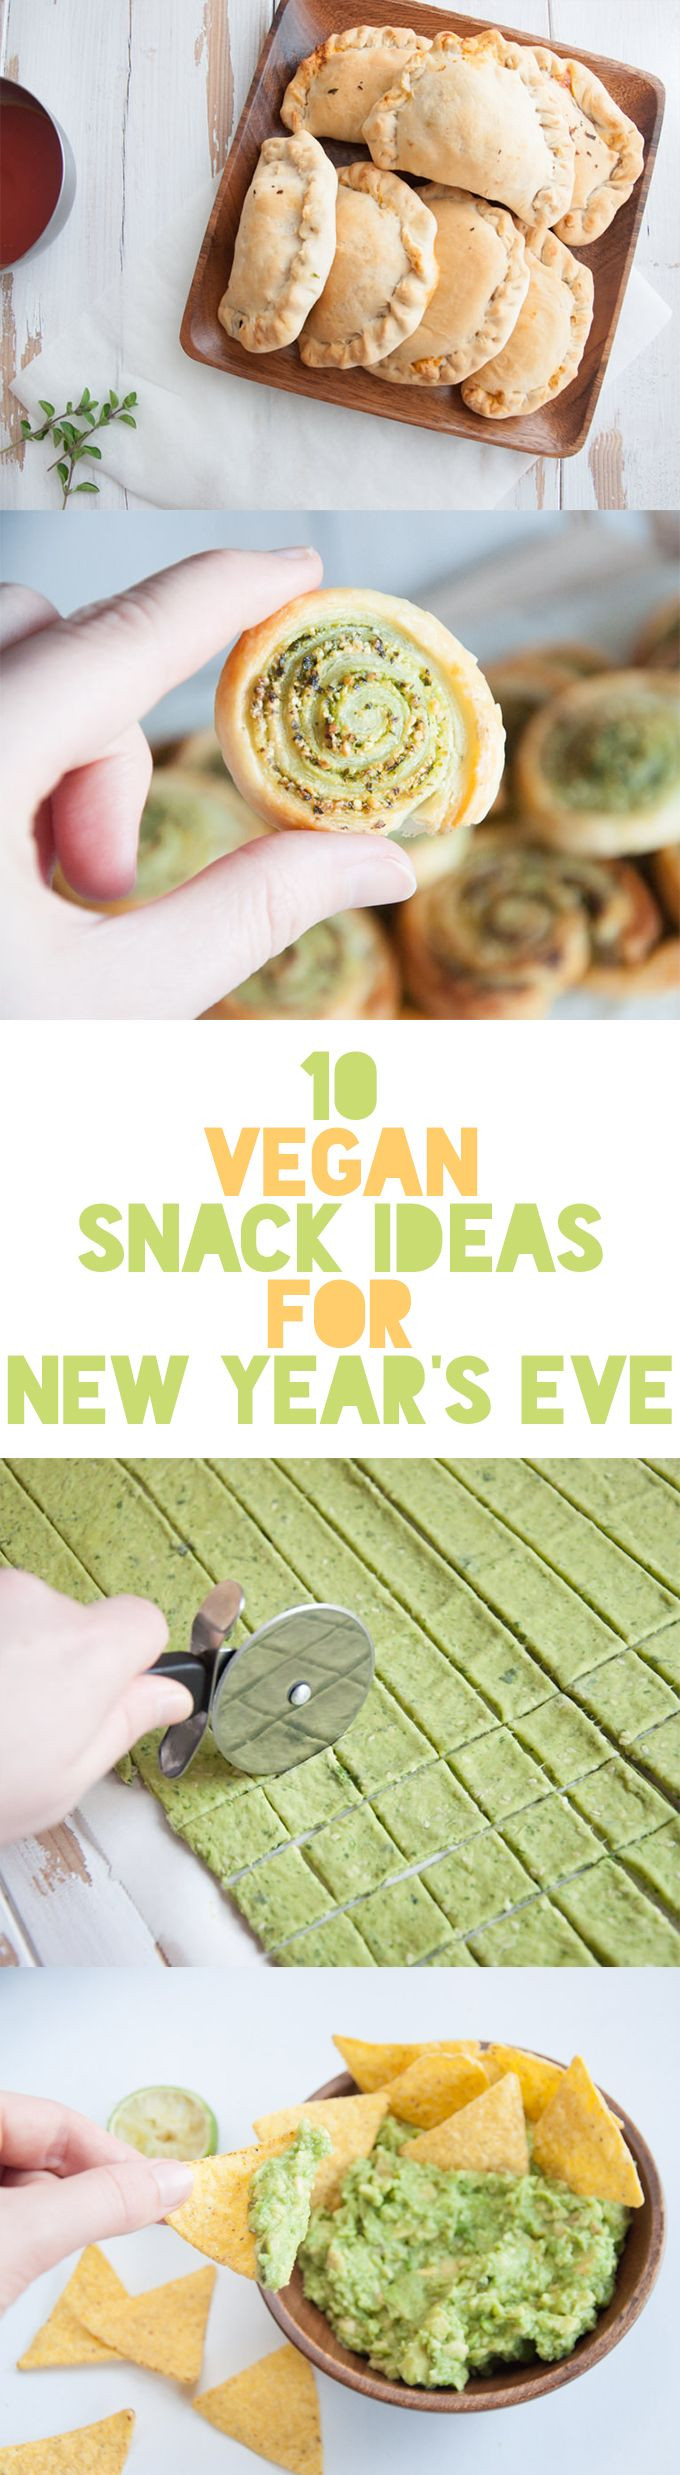 Vegetarian New Year'S Eve Recipes
 10 Vegan Snack Ideas for New Year s Eve